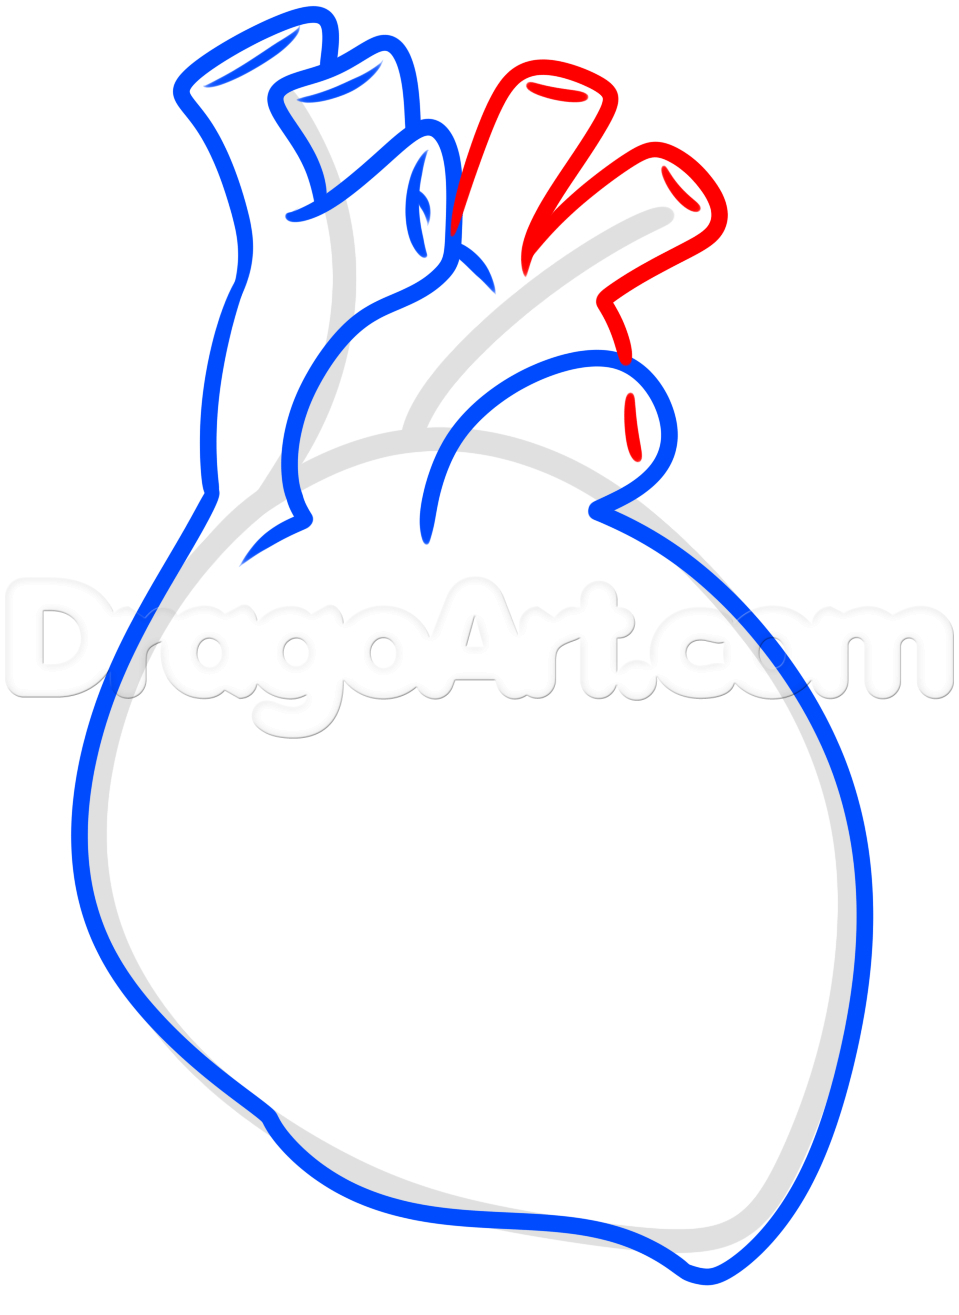 Human Heart Sketch Images at PaintingValley.com | Explore collection of ...